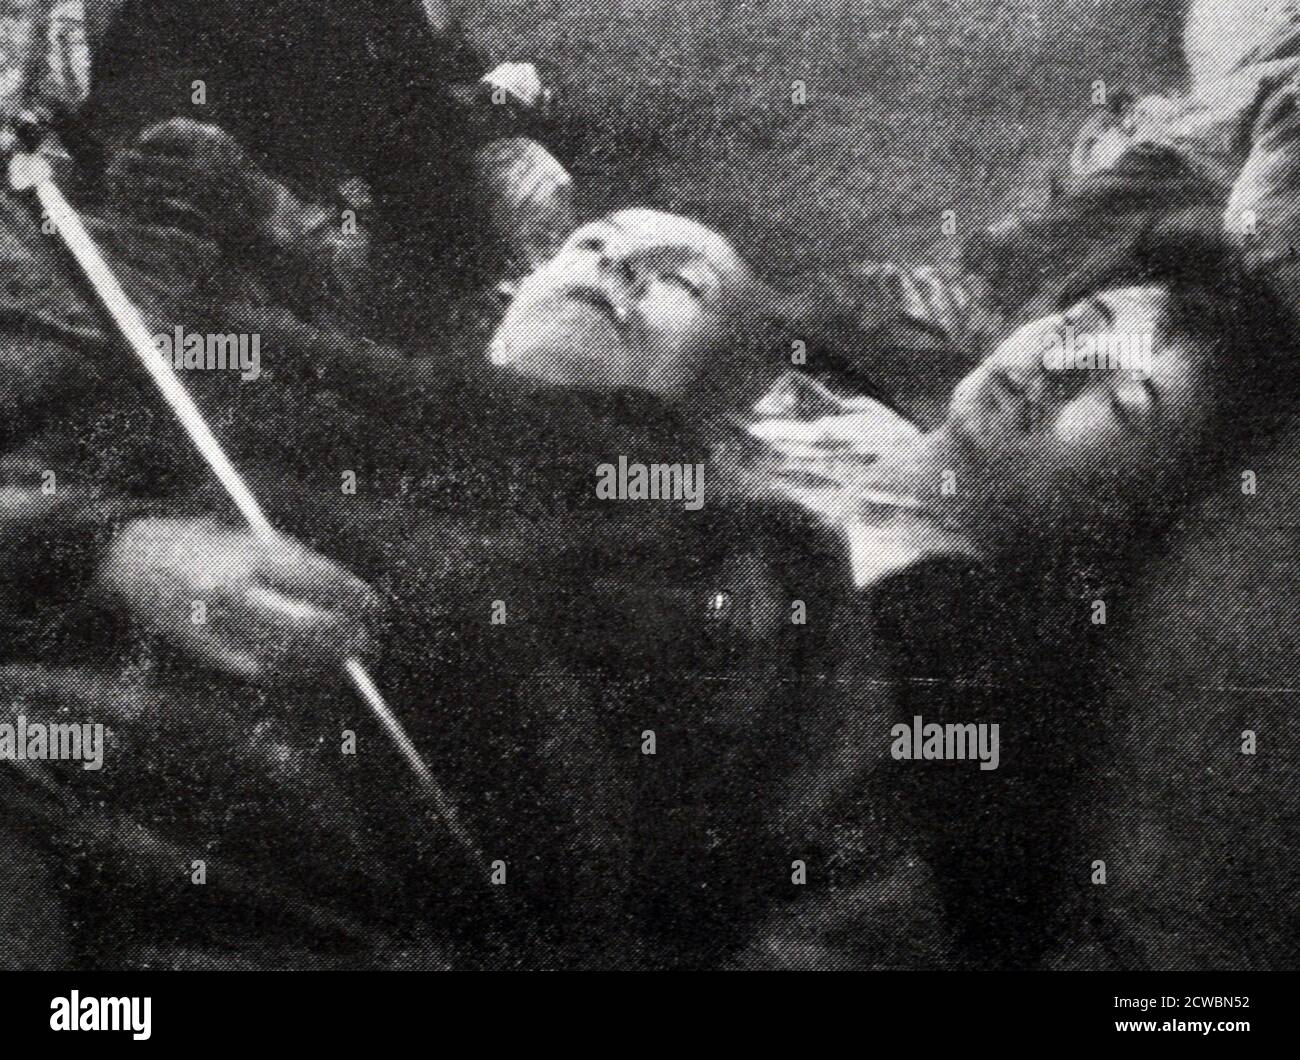 Black and white photograph of World War II (1939-1945) showing the remains of Italian dictator Benito Mussolini (1883-1945) and his mistress Clara Petacci (1912-1945) after their execution by firing squad. Stock Photo